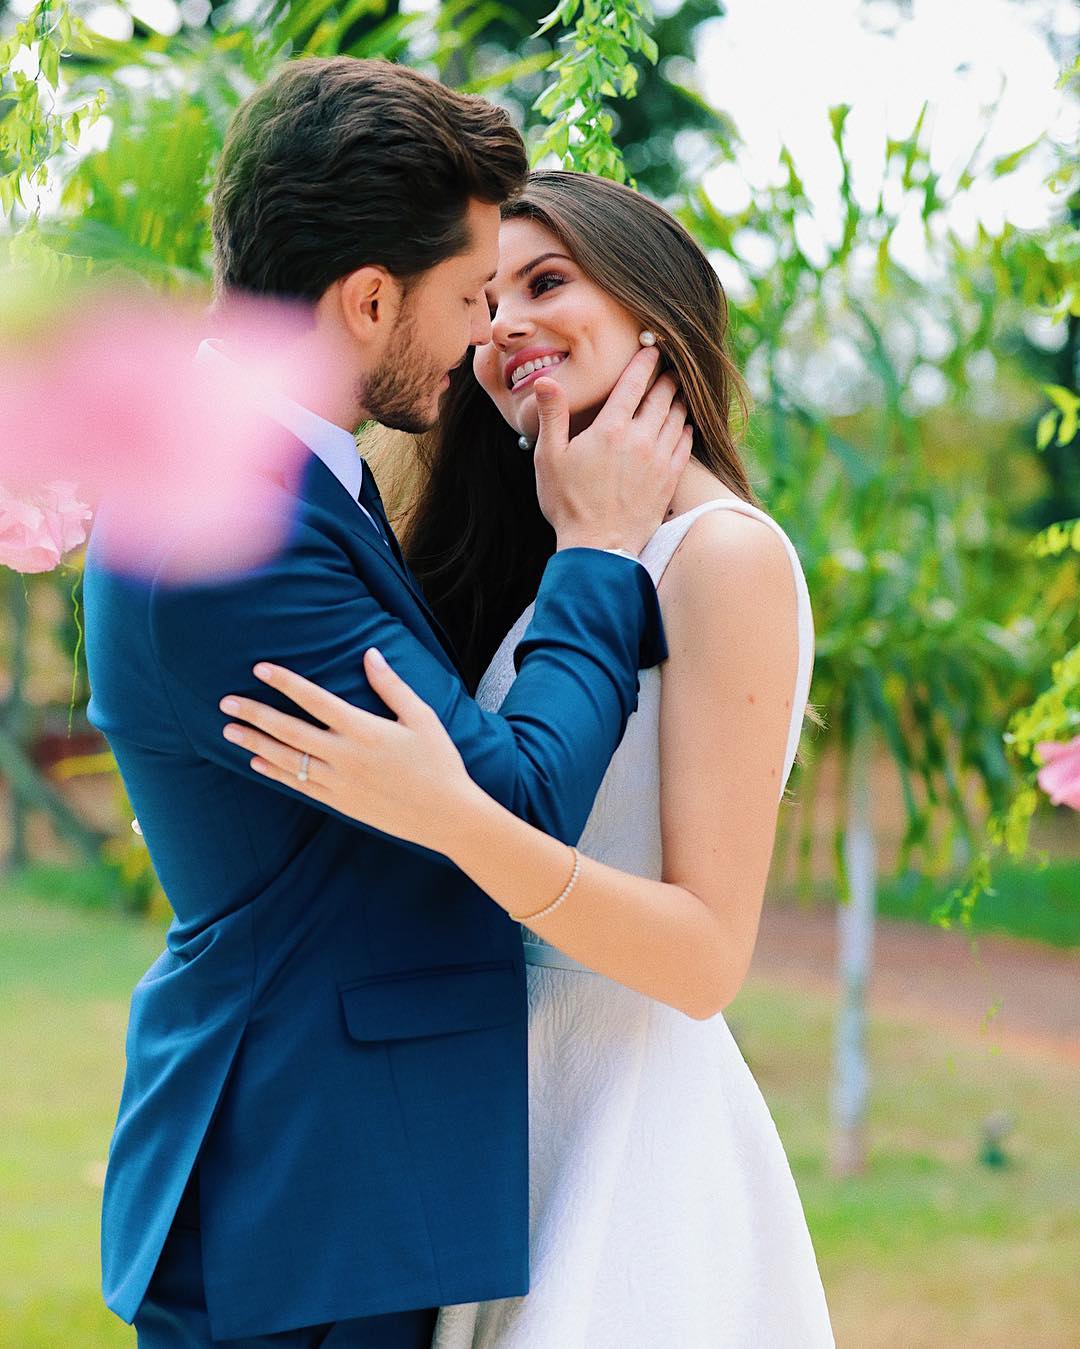 Romantic couple pose idea for a portrait. The groom is rocking an elegant navy blue suit and the bride a stunning mid length white dress with embroidered flowers. // ❤️This civil Wedding is absolutely delightful (Camila Queiroz and Kleber Toledo I Do's) // https://mysweetengagement.com/mid-length-civil-wedding-dress/